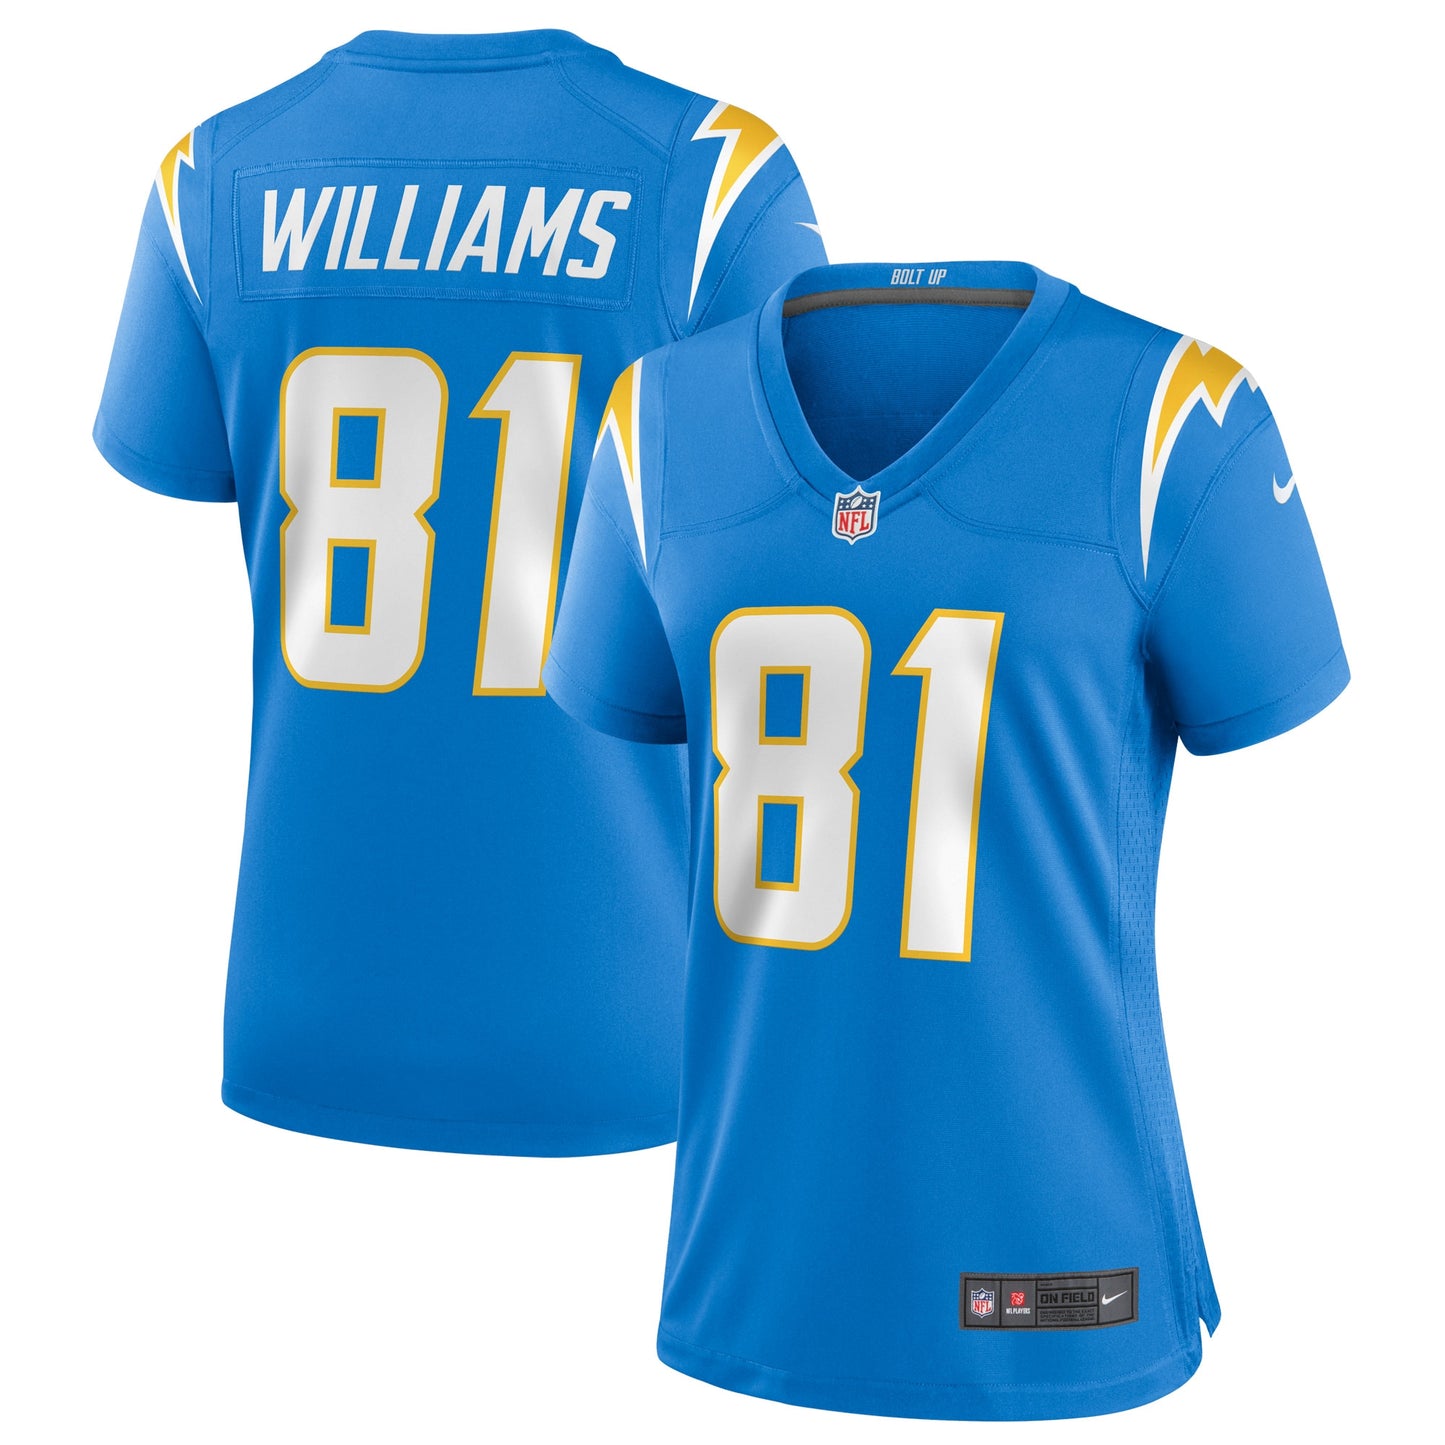 Mike Williams Los Angeles Chargers Nike Women's Game Jersey - Powder Blue